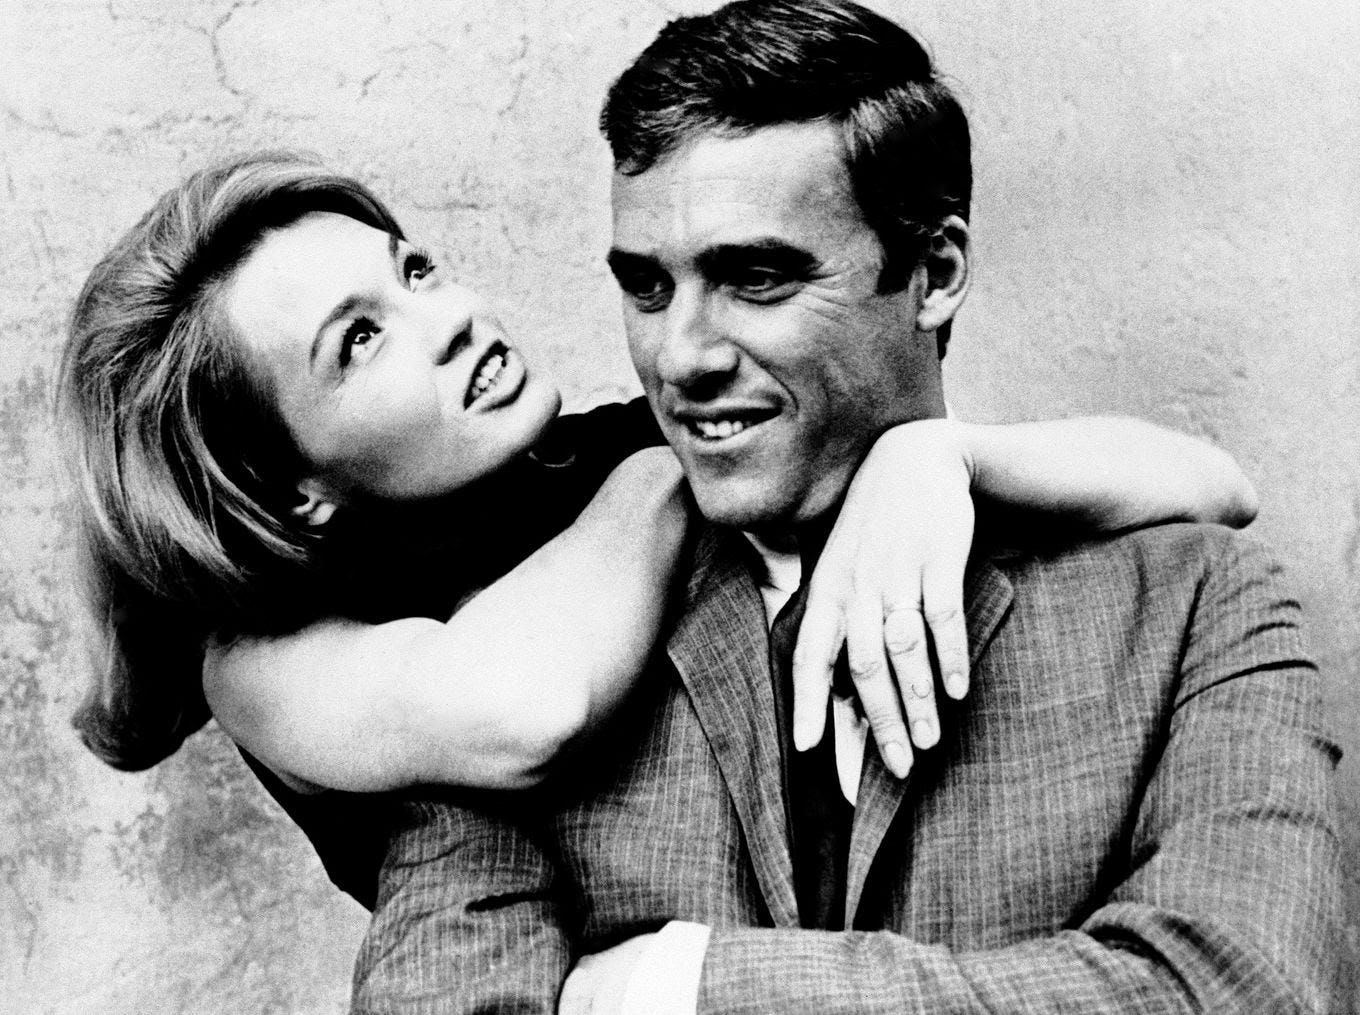 Bacharach in 1965 with his then-wife, actress Angie Dickinson. (AP)